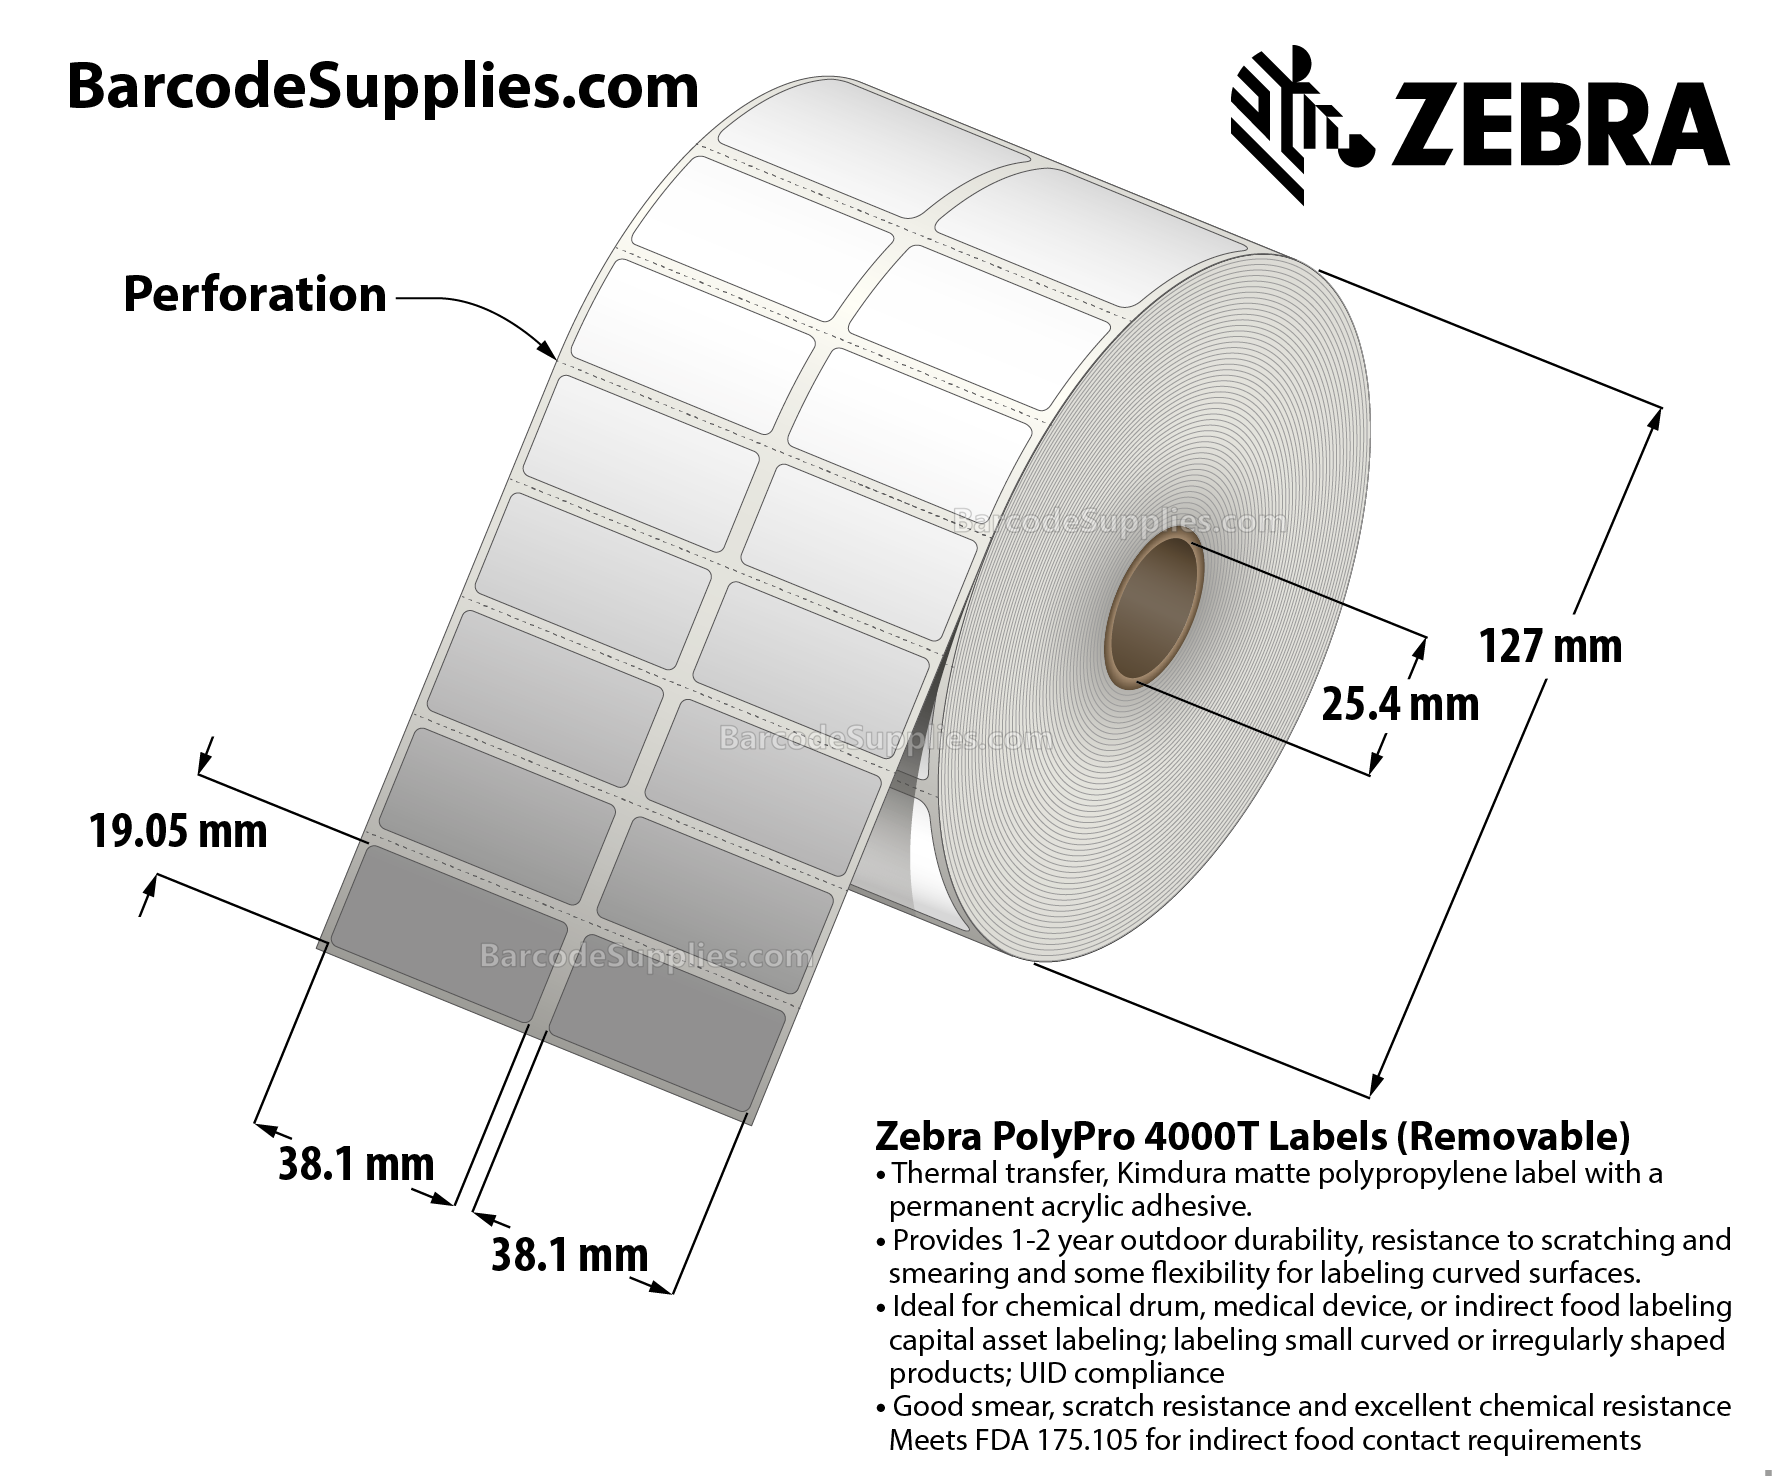 1.5 x 0.75 Thermal Transfer White PolyPro 4000T Removable (2-Across) Labels With Removable Adhesive - Perforated - 1500 Labels Per Roll - Carton Of 1 Rolls - 1500 Labels Total - MPN: 10022933